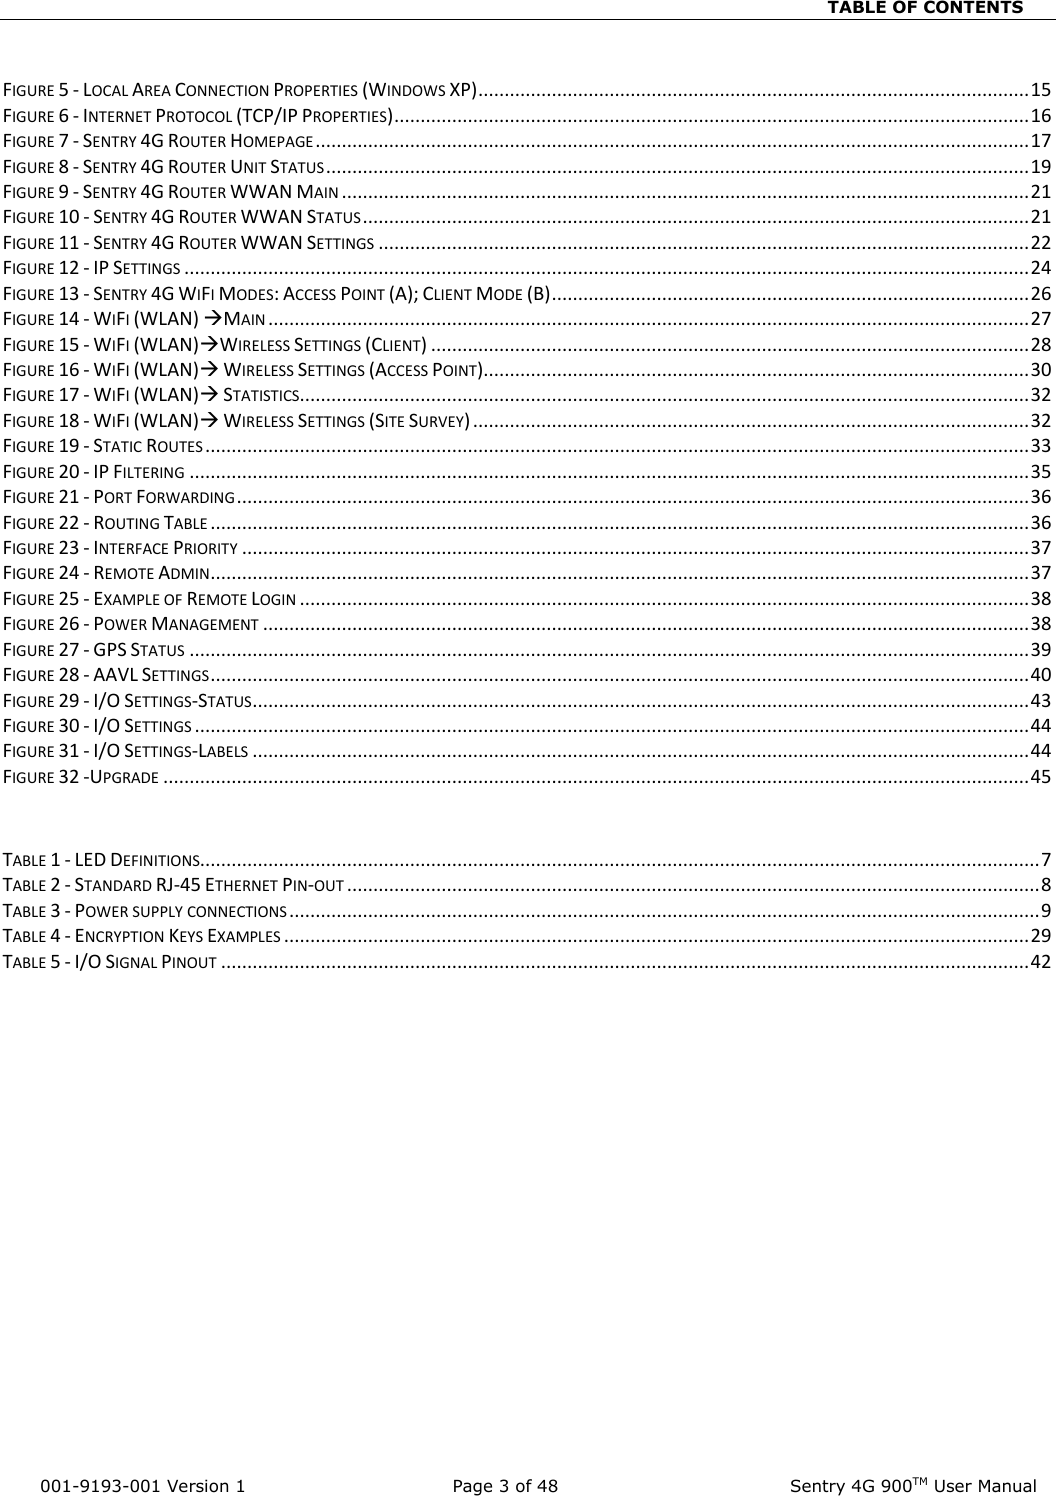                                                                          TABLE OF CONTENTS   001-9193-001 Version 1            Page 3 of 48              Sentry 4G 900TM User Manual FIGURE 5 - LOCAL AREA CONNECTION PROPERTIES (WINDOWS XP) ......................................................................................................... 15 FIGURE 6 - INTERNET PROTOCOL (TCP/IP PROPERTIES) ......................................................................................................................... 16 FIGURE 7 - SENTRY 4G ROUTER HOMEPAGE ........................................................................................................................................ 17 FIGURE 8 - SENTRY 4G ROUTER UNIT STATUS ...................................................................................................................................... 19 FIGURE 9 - SENTRY 4G ROUTER WWAN MAIN ................................................................................................................................... 21 FIGURE 10 - SENTRY 4G ROUTER WWAN STATUS ............................................................................................................................... 21 FIGURE 11 - SENTRY 4G ROUTER WWAN SETTINGS ............................................................................................................................ 22 FIGURE 12 - IP SETTINGS ................................................................................................................................................................. 24 FIGURE 13 - SENTRY 4G WIFI MODES: ACCESS POINT (A); CLIENT MODE (B) ........................................................................................... 26 FIGURE 14 - WIFI (WLAN) MAIN ................................................................................................................................................. 27 FIGURE 15 - WIFI (WLAN)WIRELESS SETTINGS (CLIENT) .................................................................................................................. 28 FIGURE 16 - WIFI (WLAN) WIRELESS SETTINGS (ACCESS POINT) ........................................................................................................ 30 FIGURE 17 - WIFI (WLAN) STATISTICS........................................................................................................................................... 32 FIGURE 18 - WIFI (WLAN) WIRELESS SETTINGS (SITE SURVEY) .......................................................................................................... 32 FIGURE 19 - STATIC ROUTES ............................................................................................................................................................. 33 FIGURE 20 - IP FILTERING ................................................................................................................................................................ 35 FIGURE 21 - PORT FORWARDING ....................................................................................................................................................... 36 FIGURE 22 - ROUTING TABLE ............................................................................................................................................................ 36 FIGURE 23 - INTERFACE PRIORITY ...................................................................................................................................................... 37 FIGURE 24 - REMOTE ADMIN ............................................................................................................................................................ 37 FIGURE 25 - EXAMPLE OF REMOTE LOGIN ........................................................................................................................................... 38 FIGURE 26 - POWER MANAGEMENT .................................................................................................................................................. 38 FIGURE 27 - GPS STATUS ................................................................................................................................................................ 39 FIGURE 28 - AAVL SETTINGS ............................................................................................................................................................ 40 FIGURE 29 - I/O SETTINGS-STATUS .................................................................................................................................................... 43 FIGURE 30 - I/O SETTINGS ............................................................................................................................................................... 44 FIGURE 31 - I/O SETTINGS-LABELS .................................................................................................................................................... 44 FIGURE 32 -UPGRADE ..................................................................................................................................................................... 45   TABLE 1 - LED DEFINITIONS................................................................................................................................................................ 7 TABLE 2 - STANDARD RJ-45 ETHERNET PIN-OUT .................................................................................................................................... 8 TABLE 3 - POWER SUPPLY CONNECTIONS ............................................................................................................................................... 9 TABLE 4 - ENCRYPTION KEYS EXAMPLES .............................................................................................................................................. 29 TABLE 5 - I/O SIGNAL PINOUT .......................................................................................................................................................... 42 